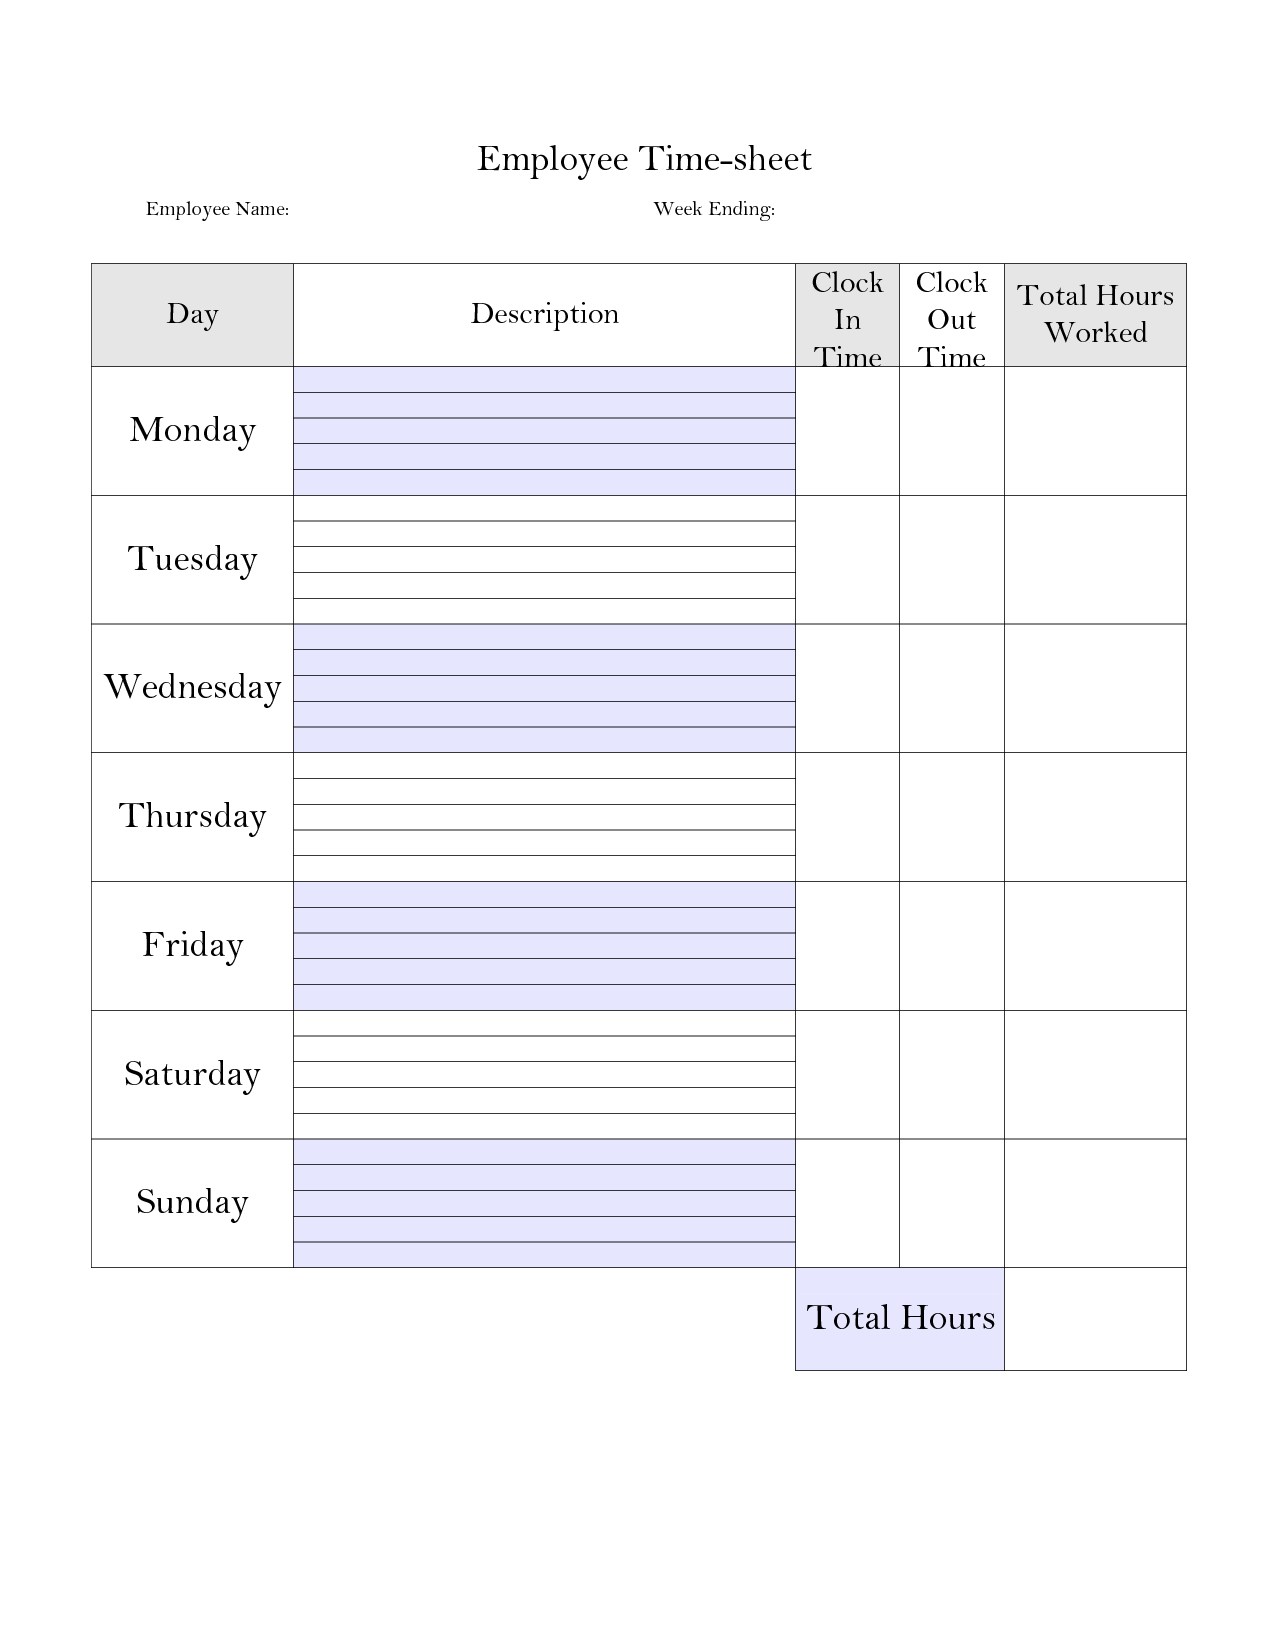 Time Card Spreadsheet Throughout Time Tracking Spreadsheet And Printable Weekly Time Sheet Printable